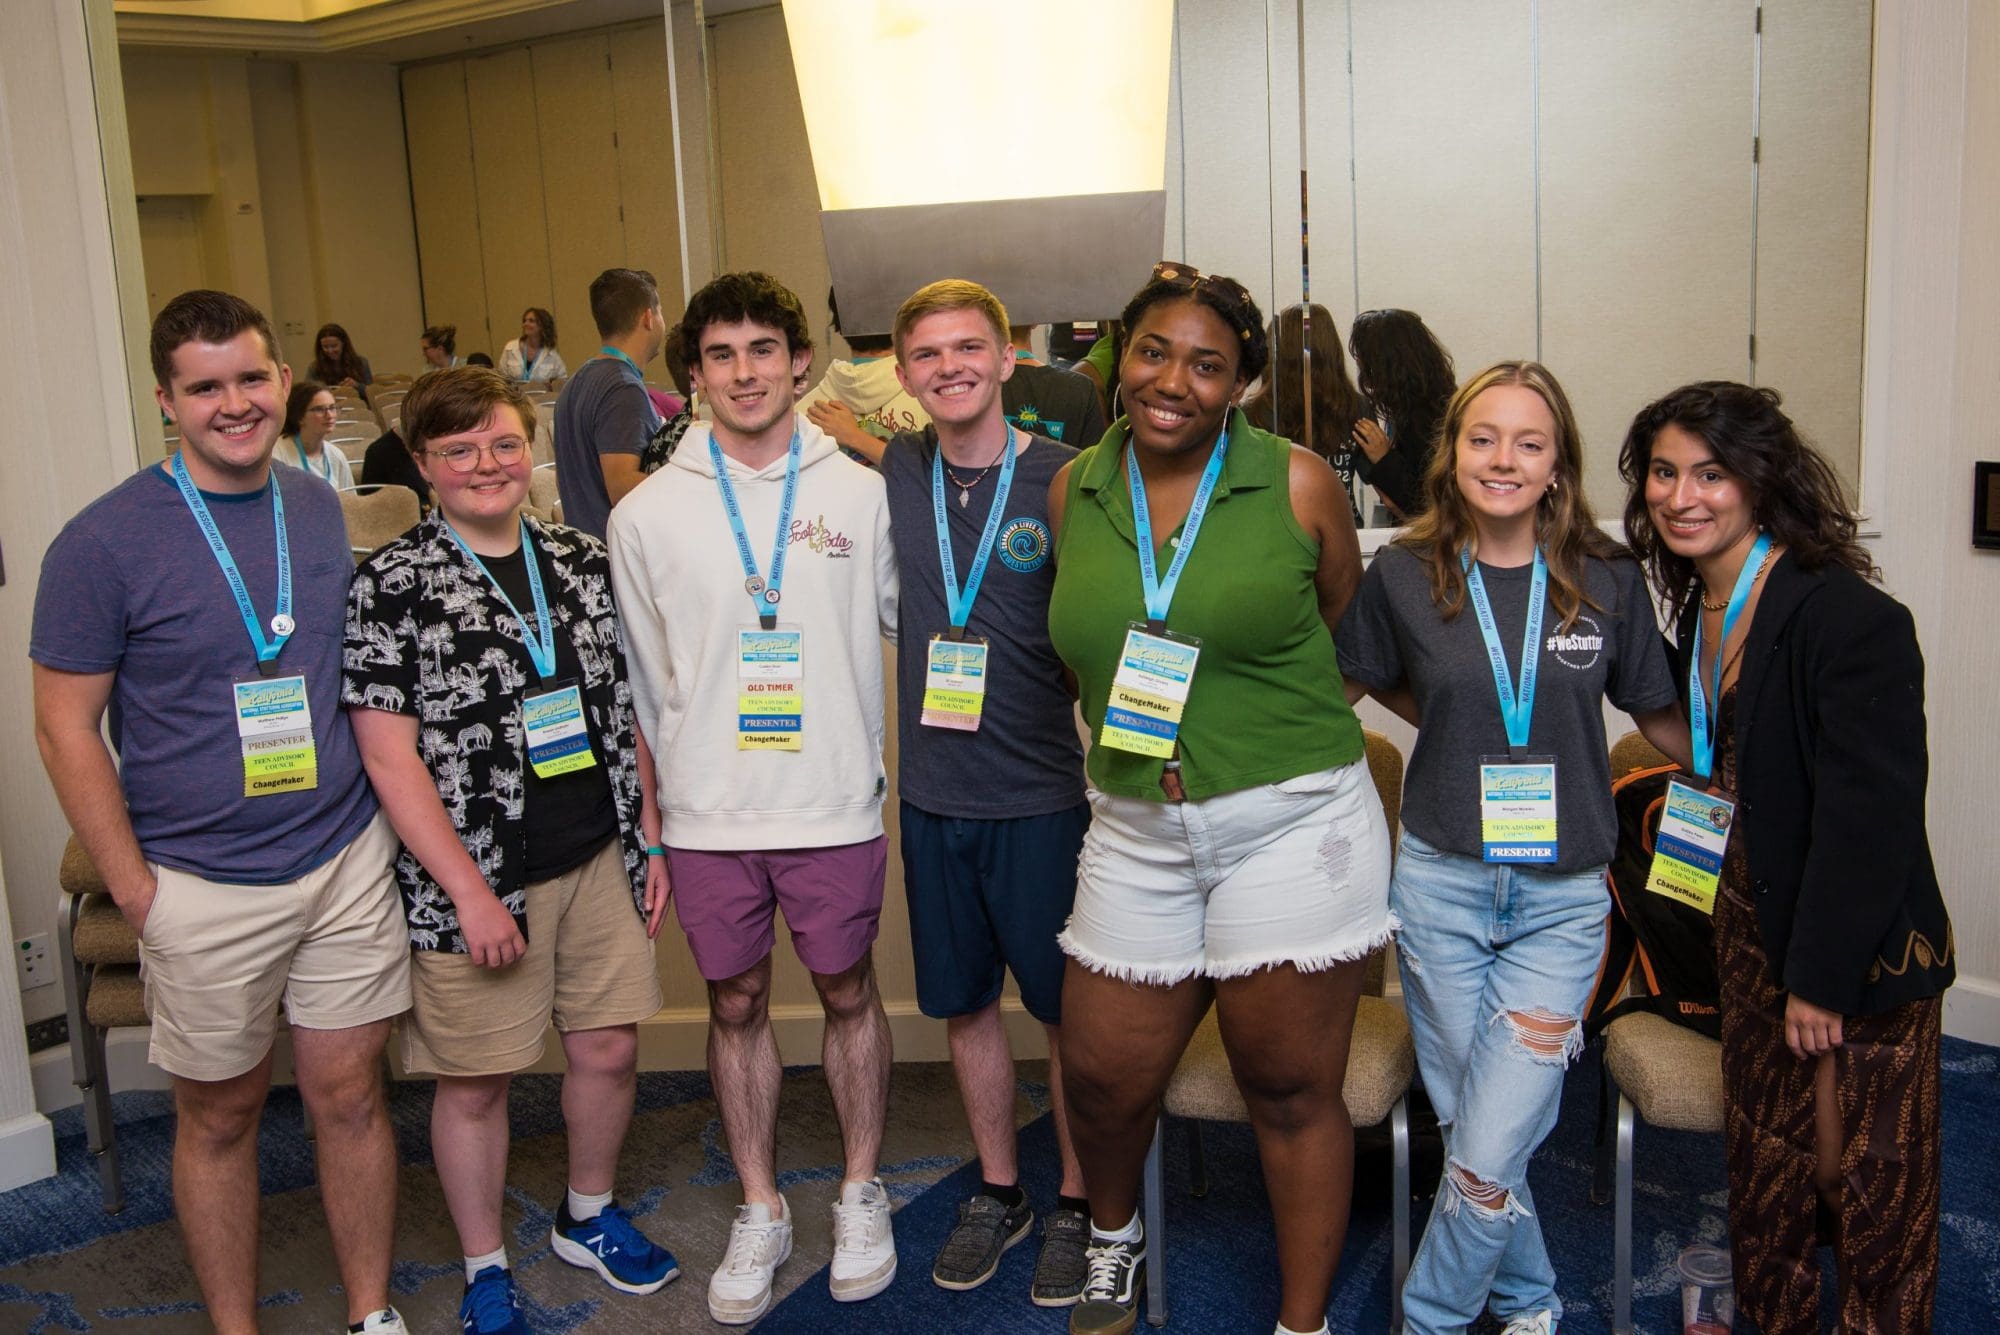 Group of eight diverse teens smiling and posing together at a conference, wearing name badges and casual attire.